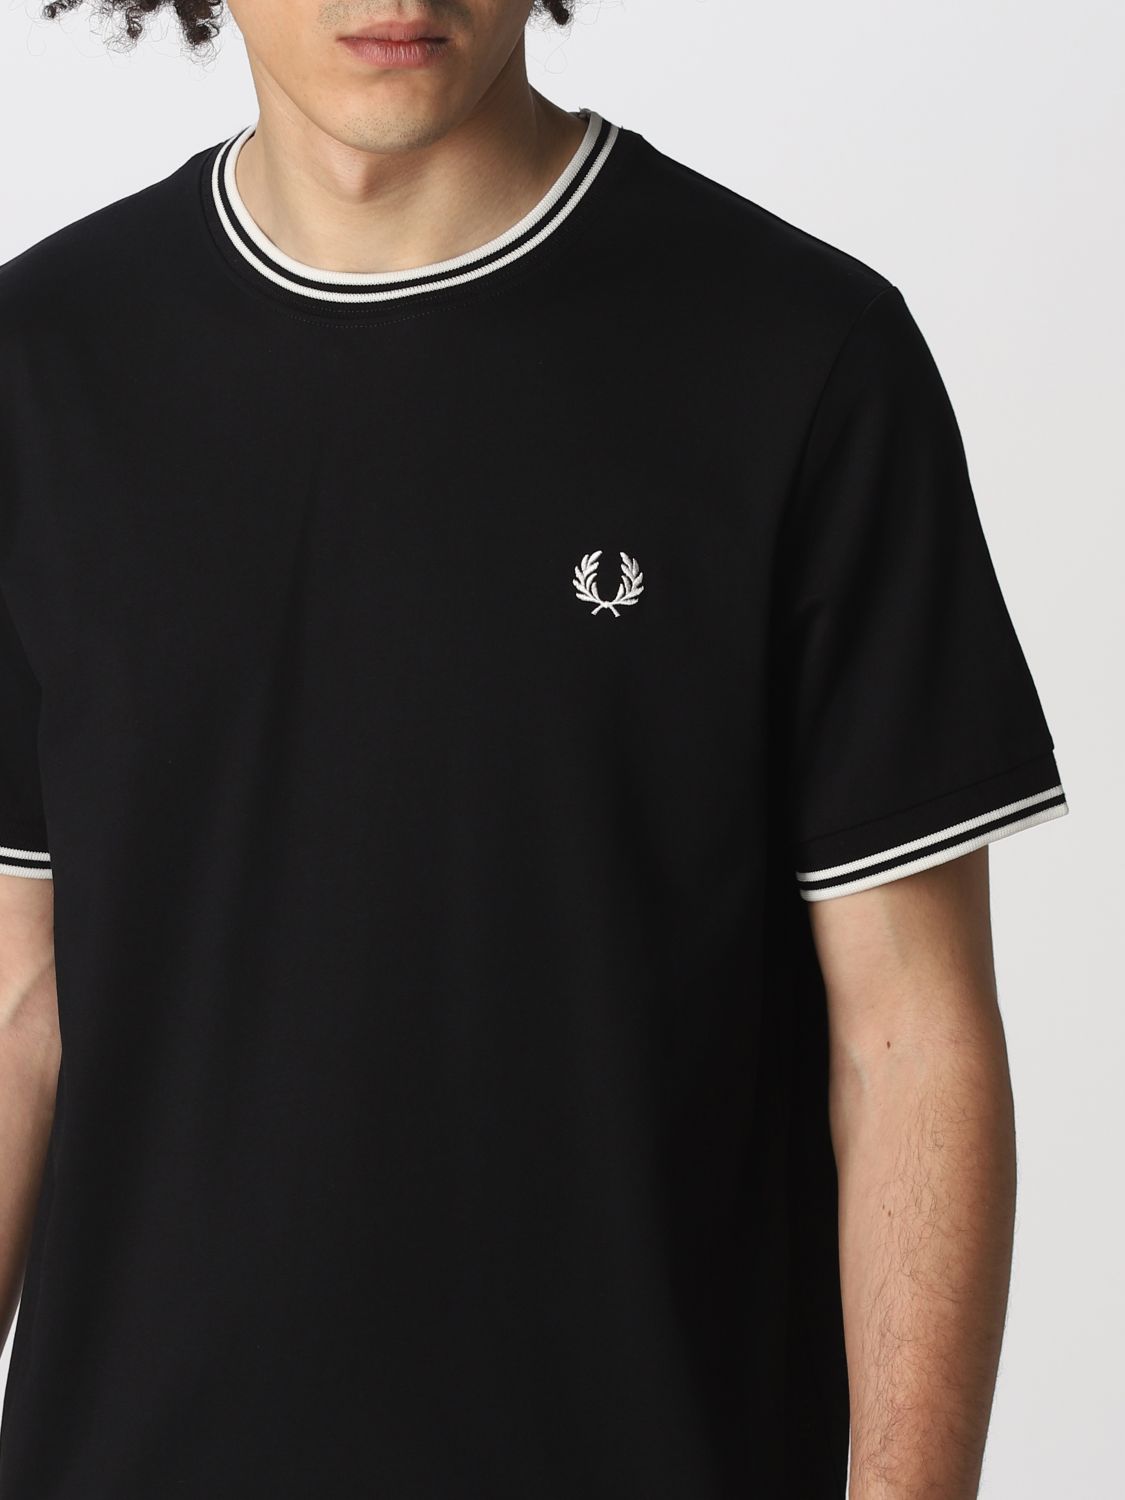 Tシャツ Fred Perry: Tシャツ メンズ Fred Perry ブラック 3